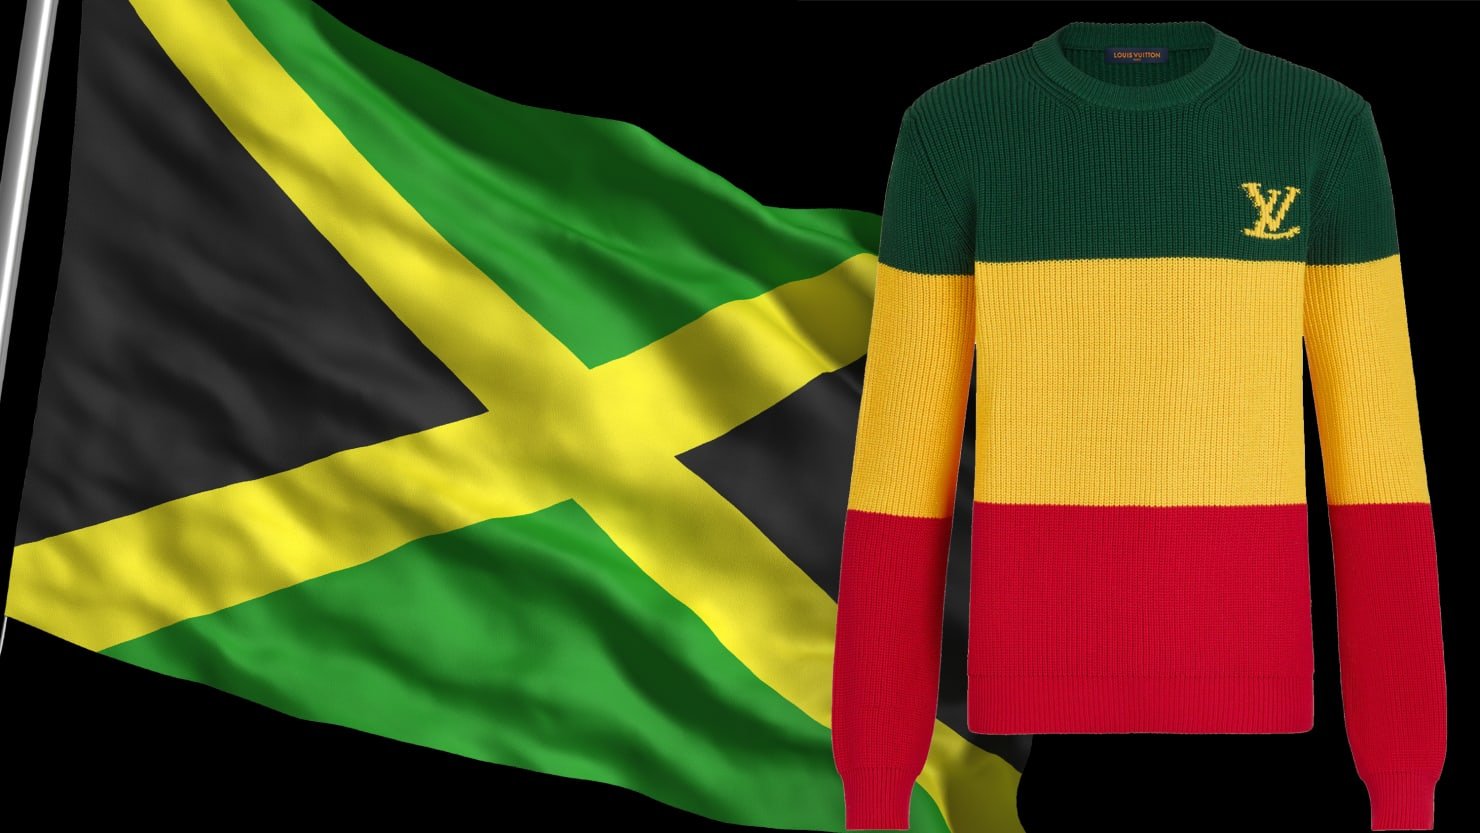 Louis Vuitton Made a Jamaican Flag Sweater With Wrong Colours, People are Outraged